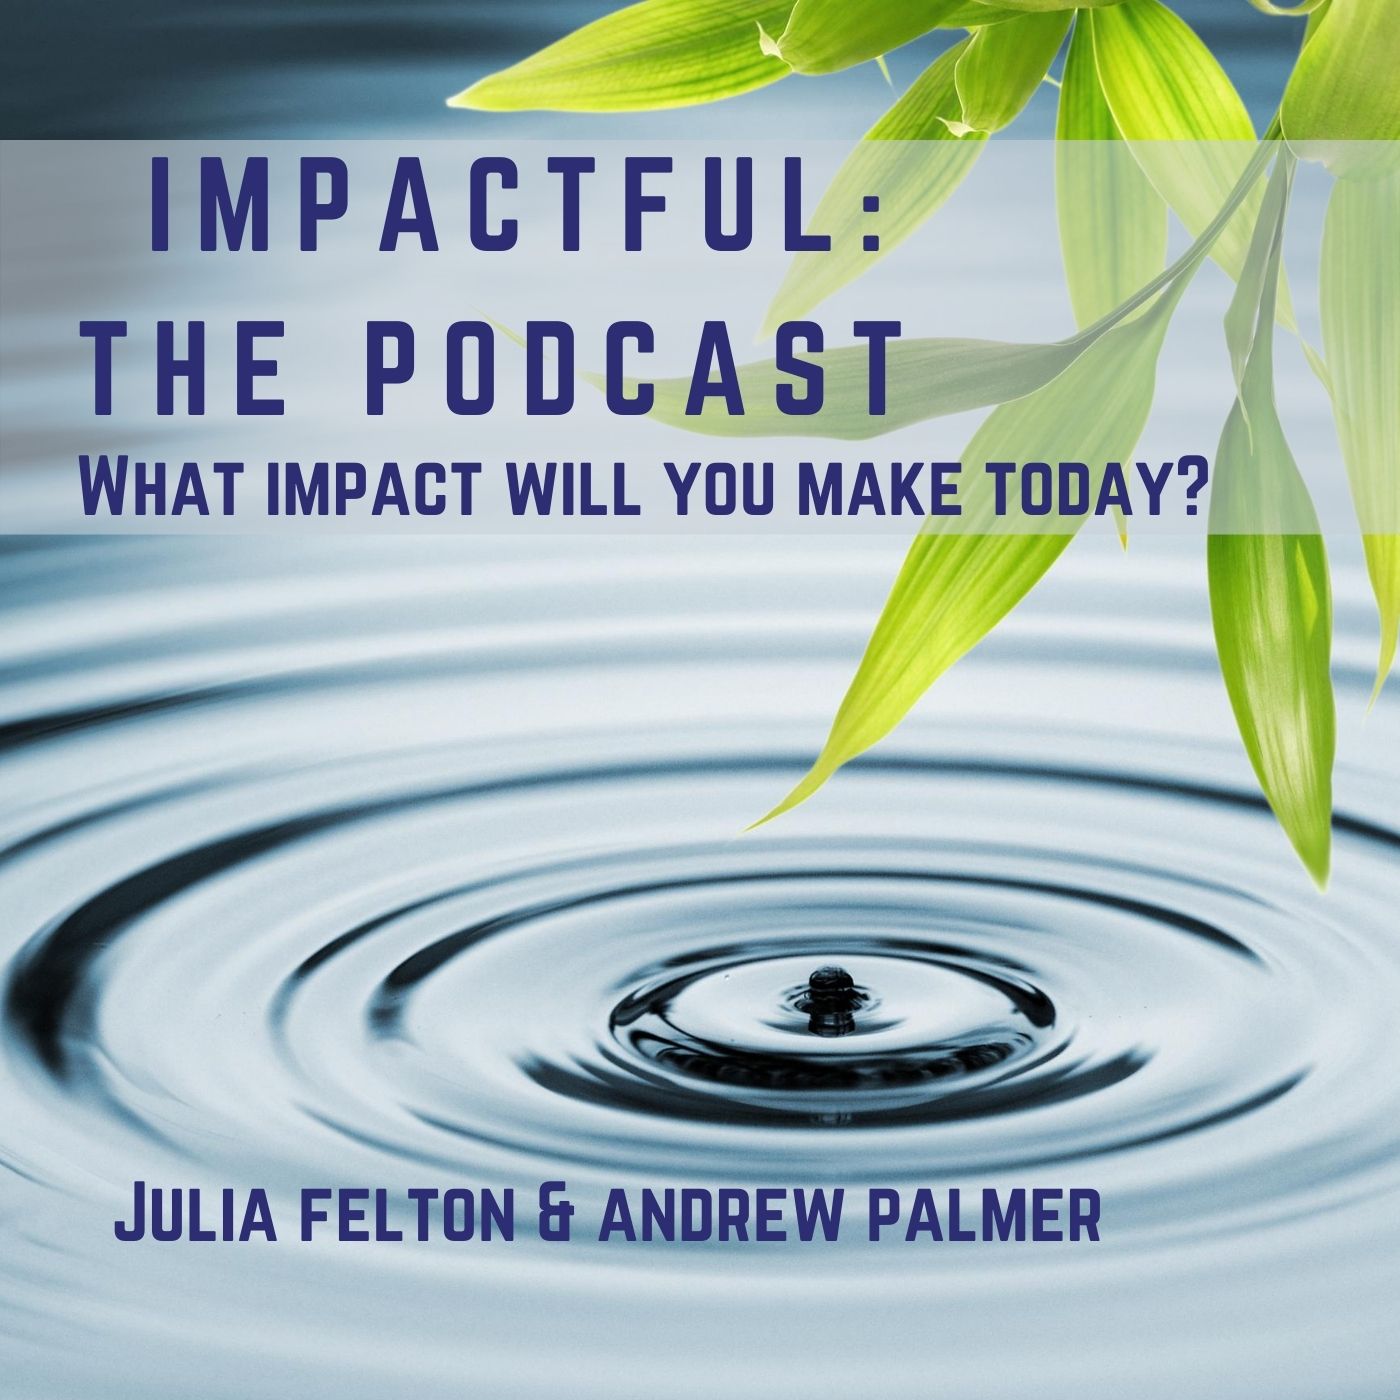 Impactful: The Podcast